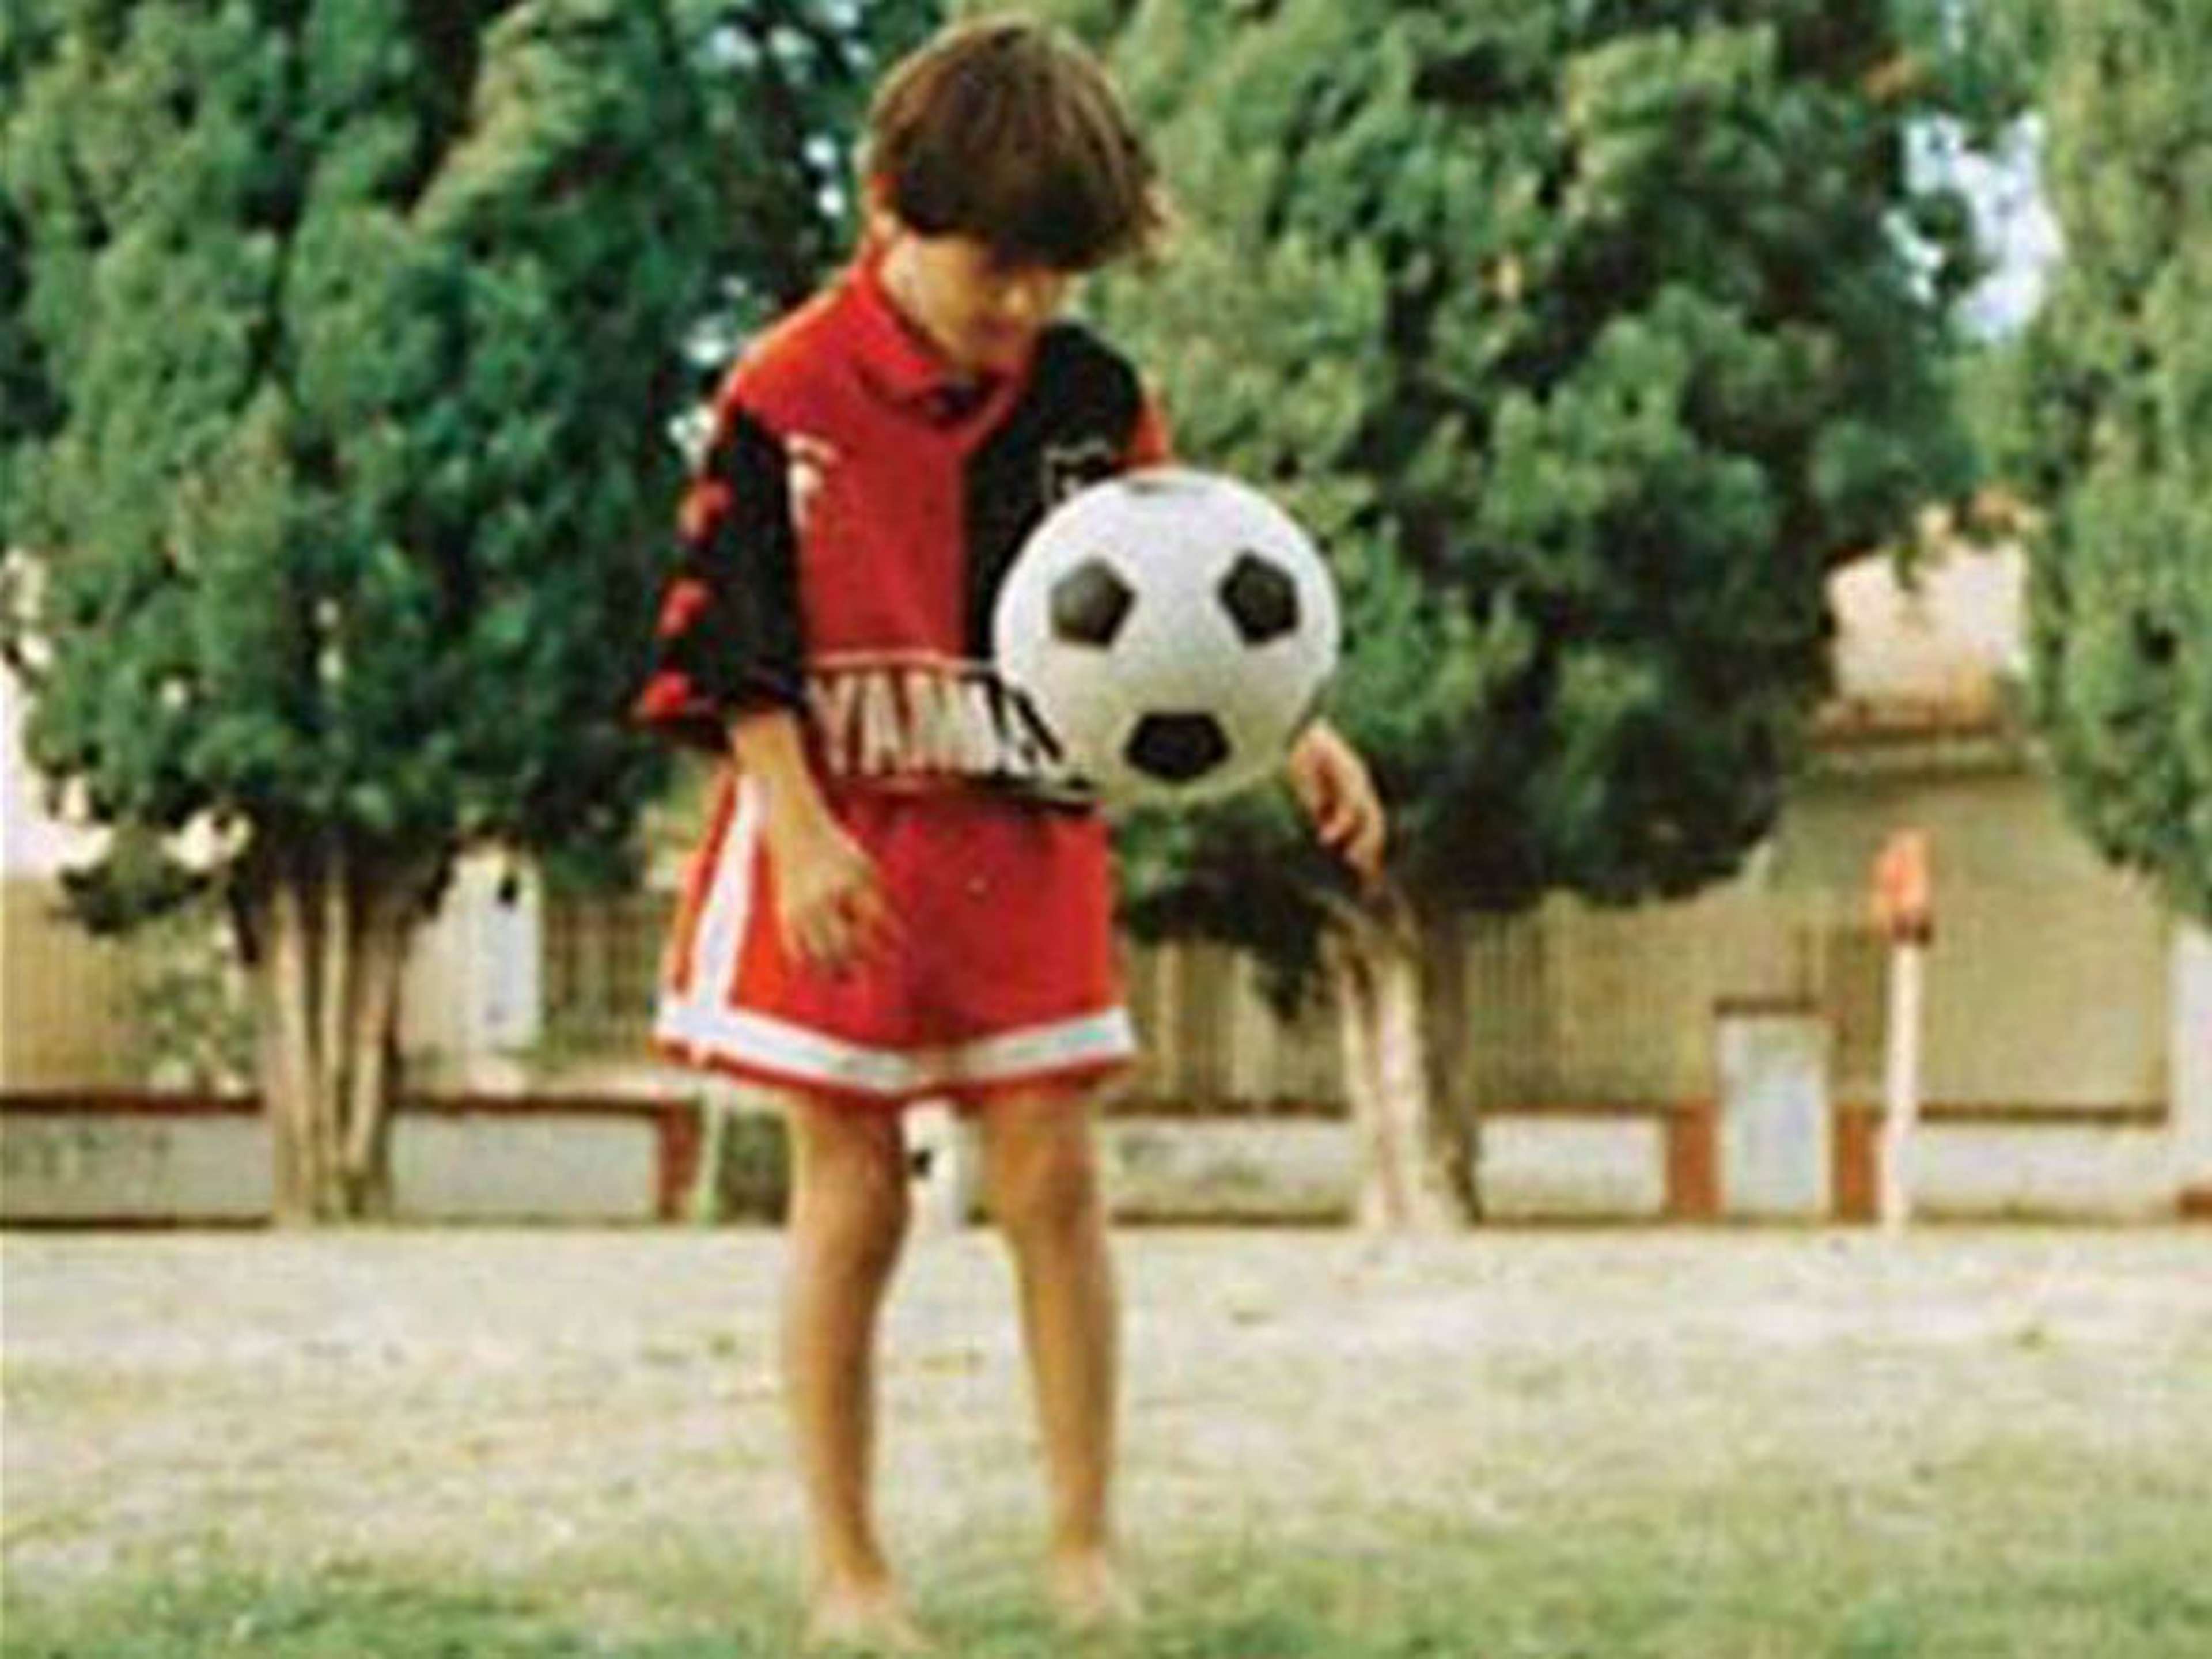 Messi Newell´s